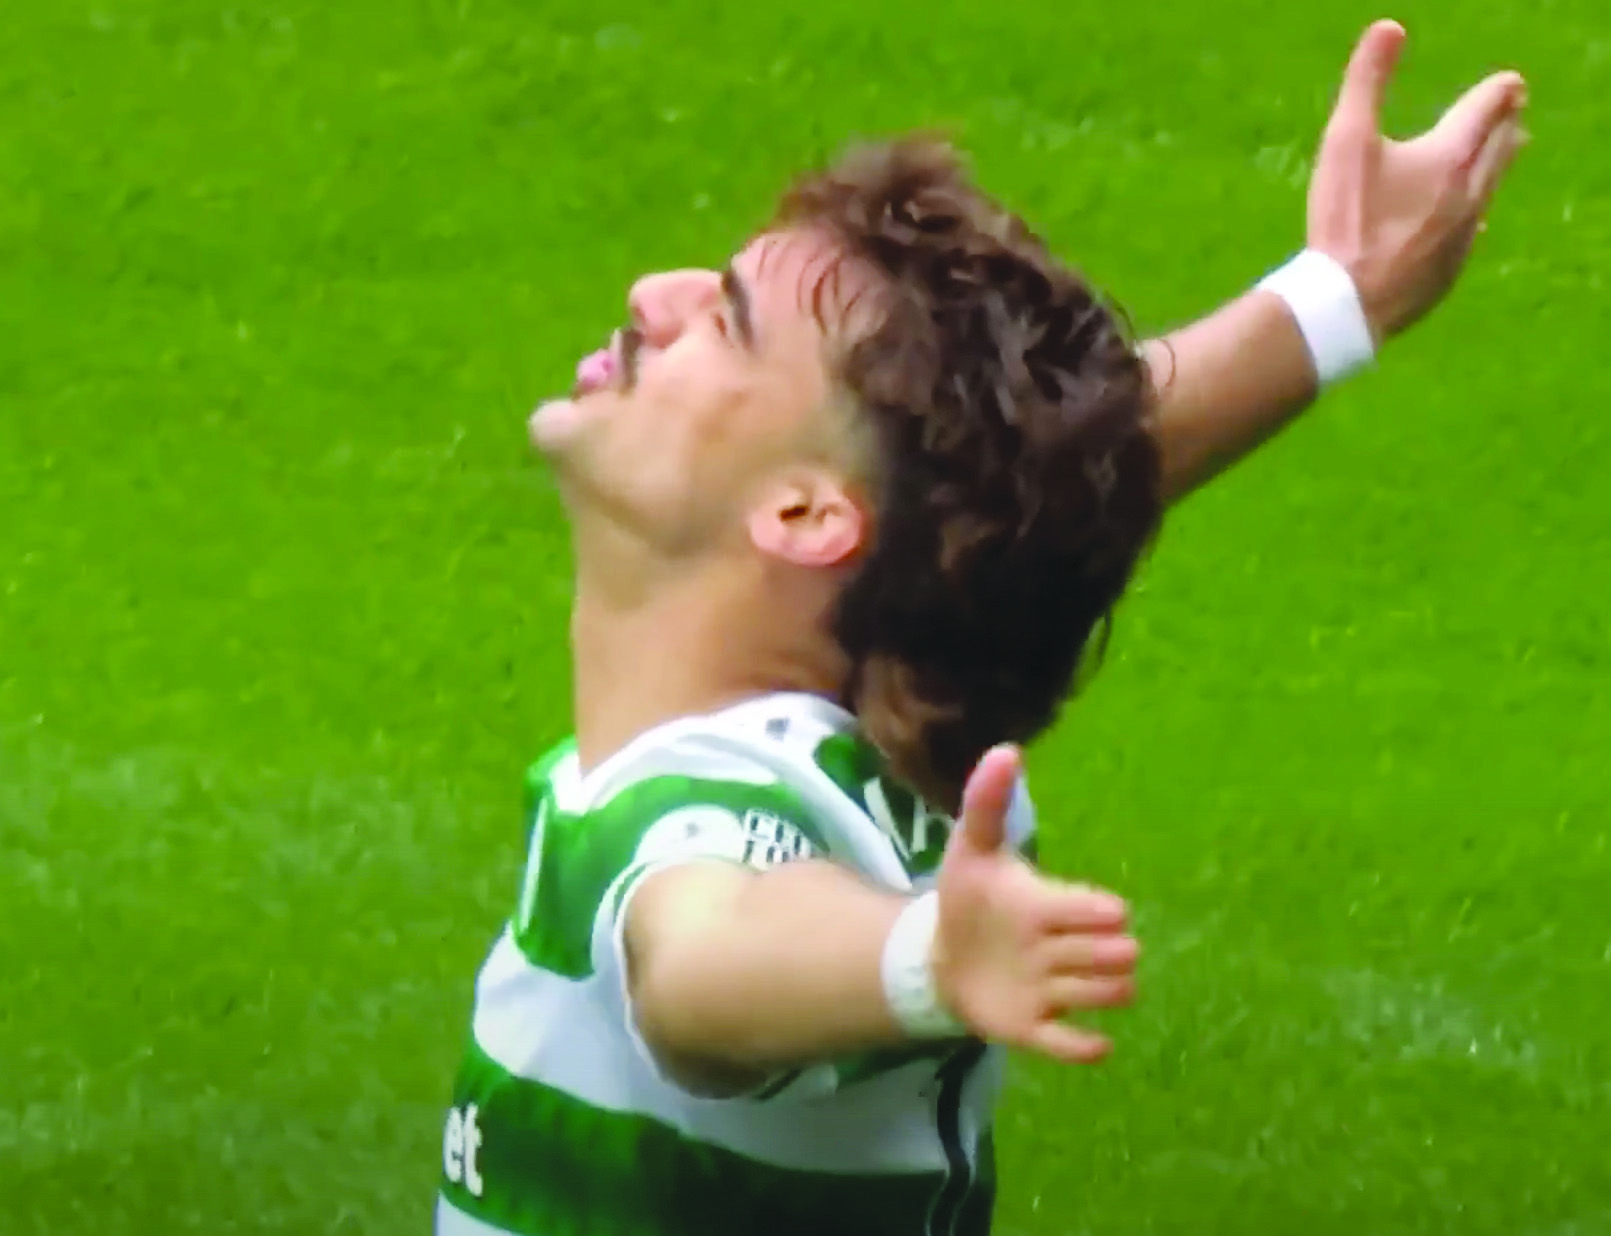 Jota’s header against Rangers on Sunday was enough to see Celtic through to the Scottish Cup final and leave them on the brink of another treble